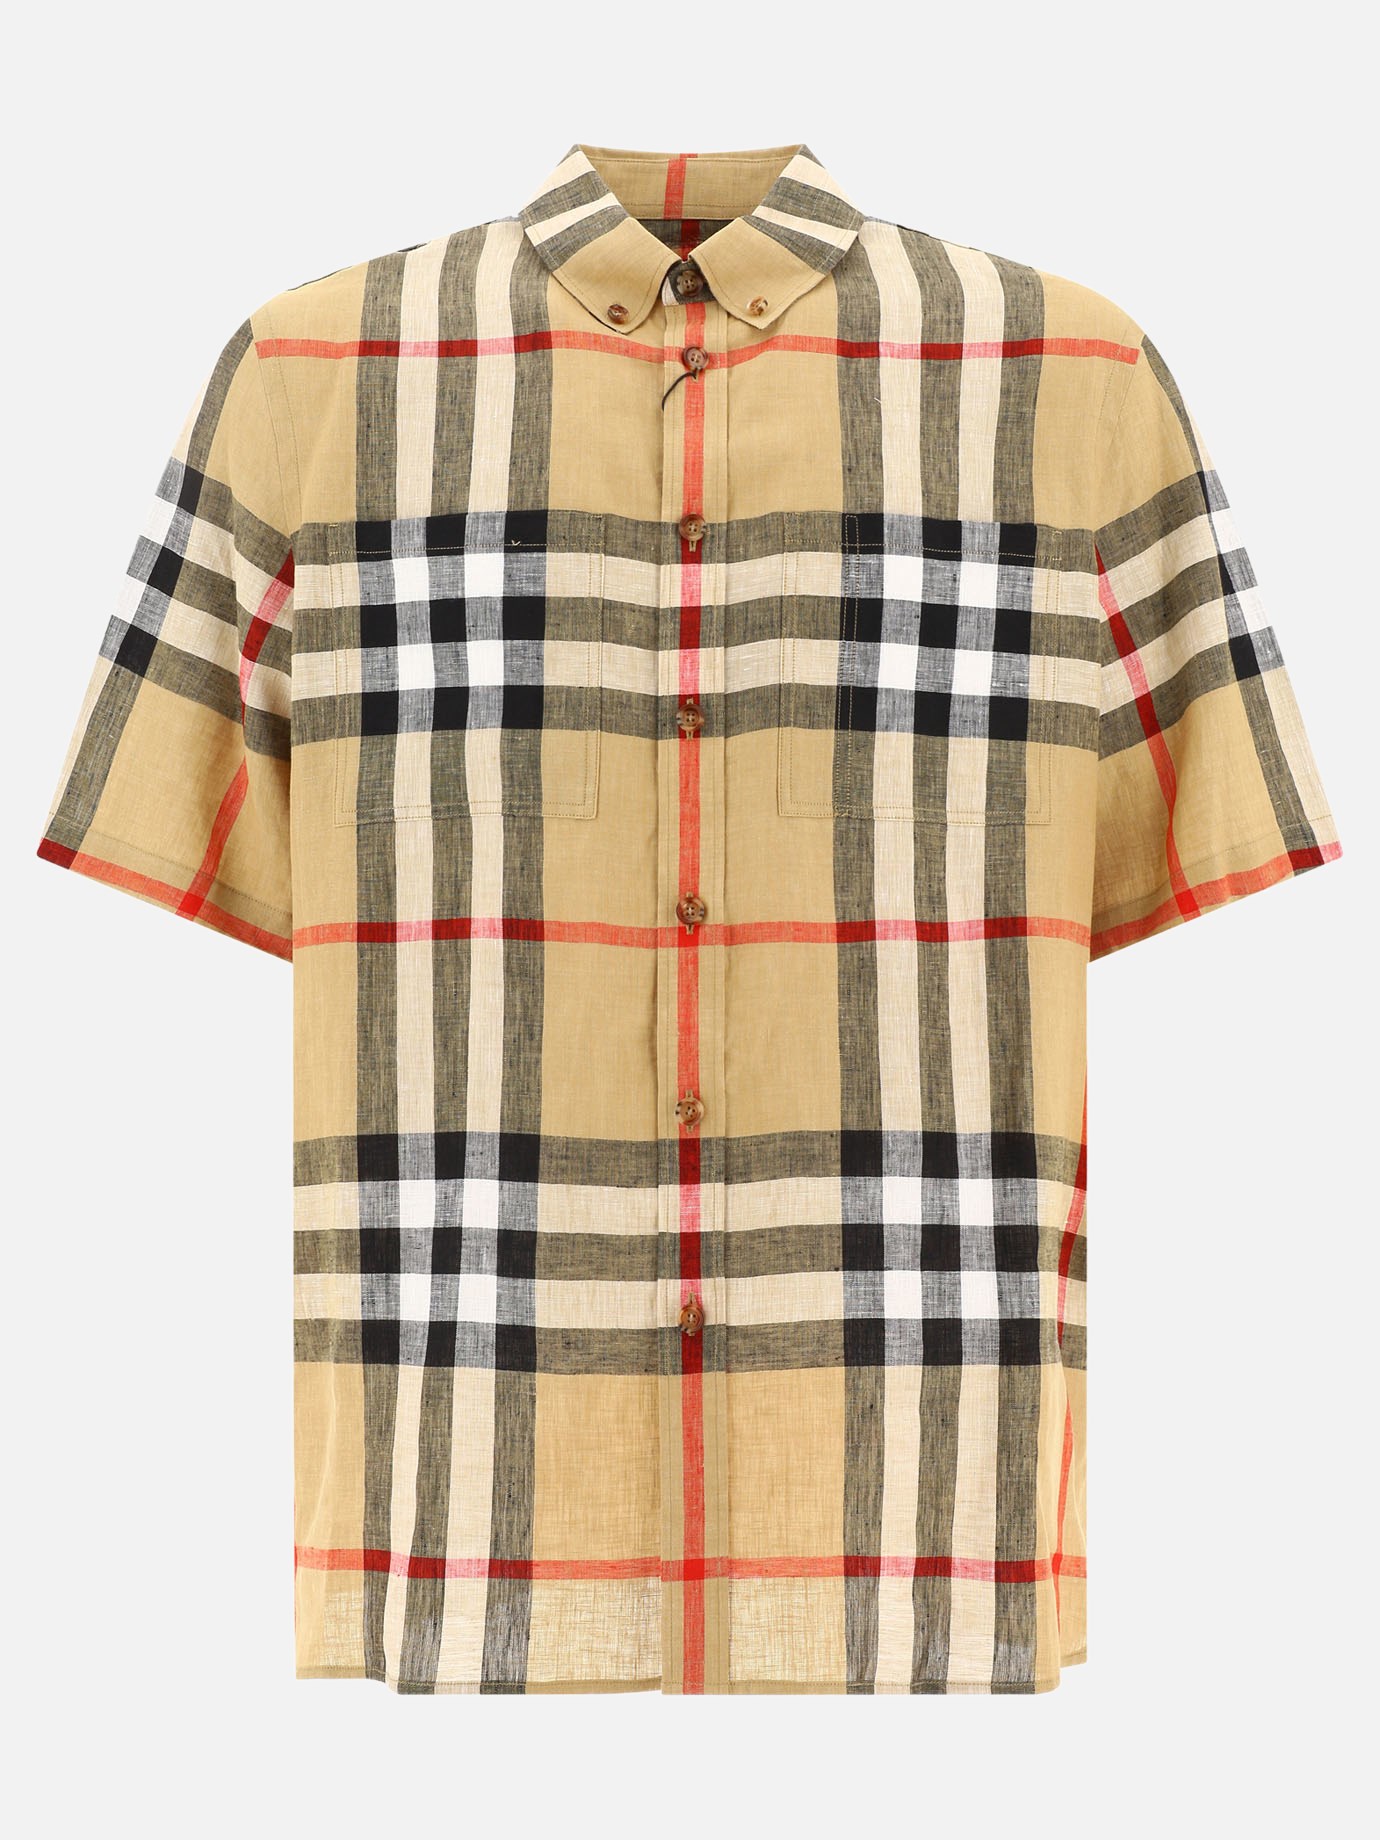  Thaxted  shirtby Burberry - 2